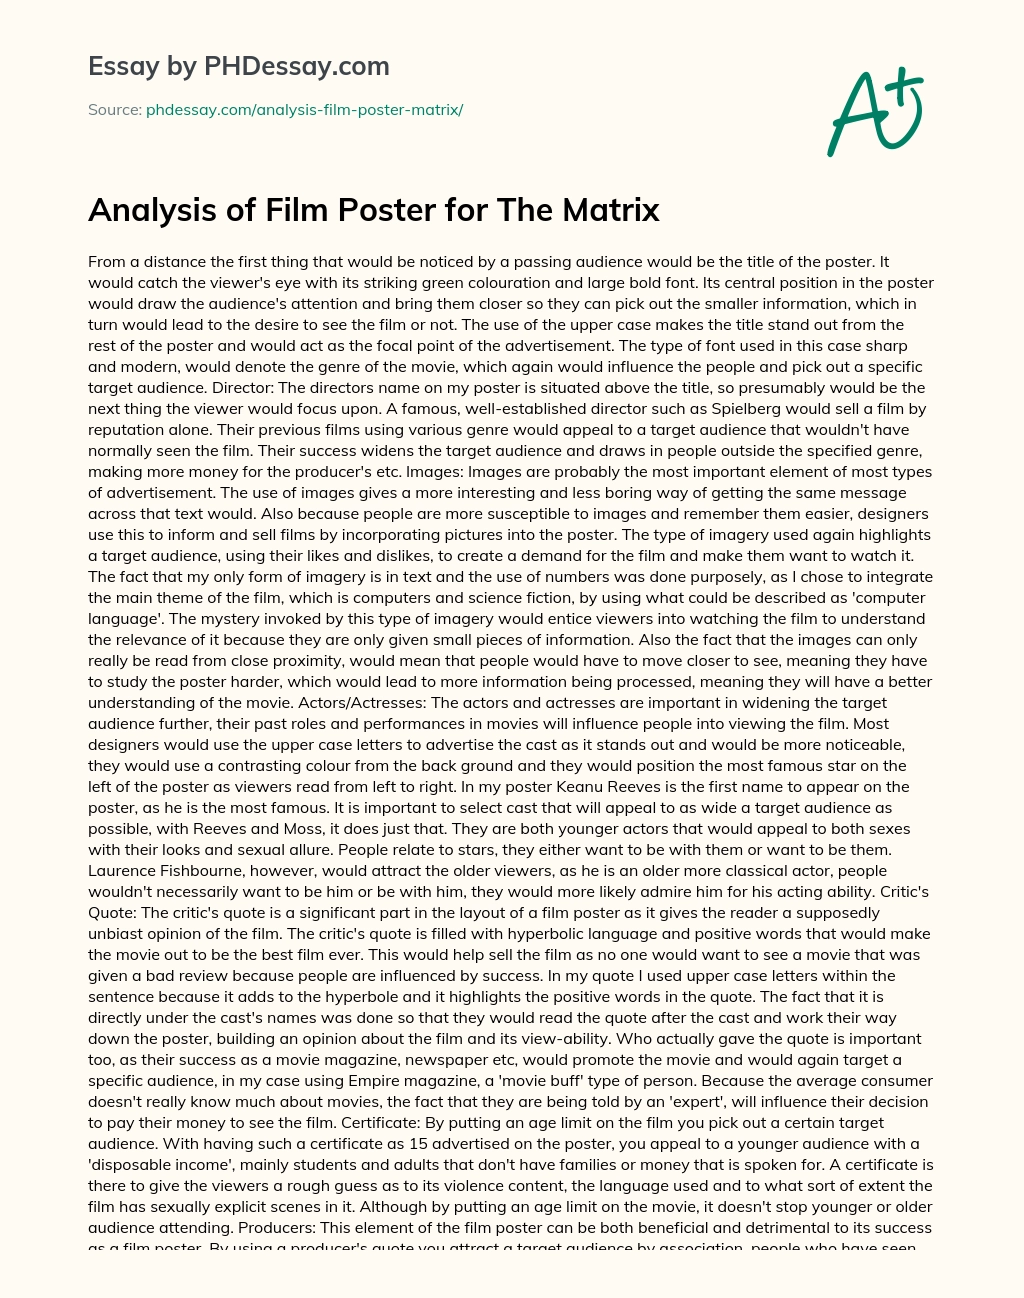 Analysis of Film Poster for The Matrix essay